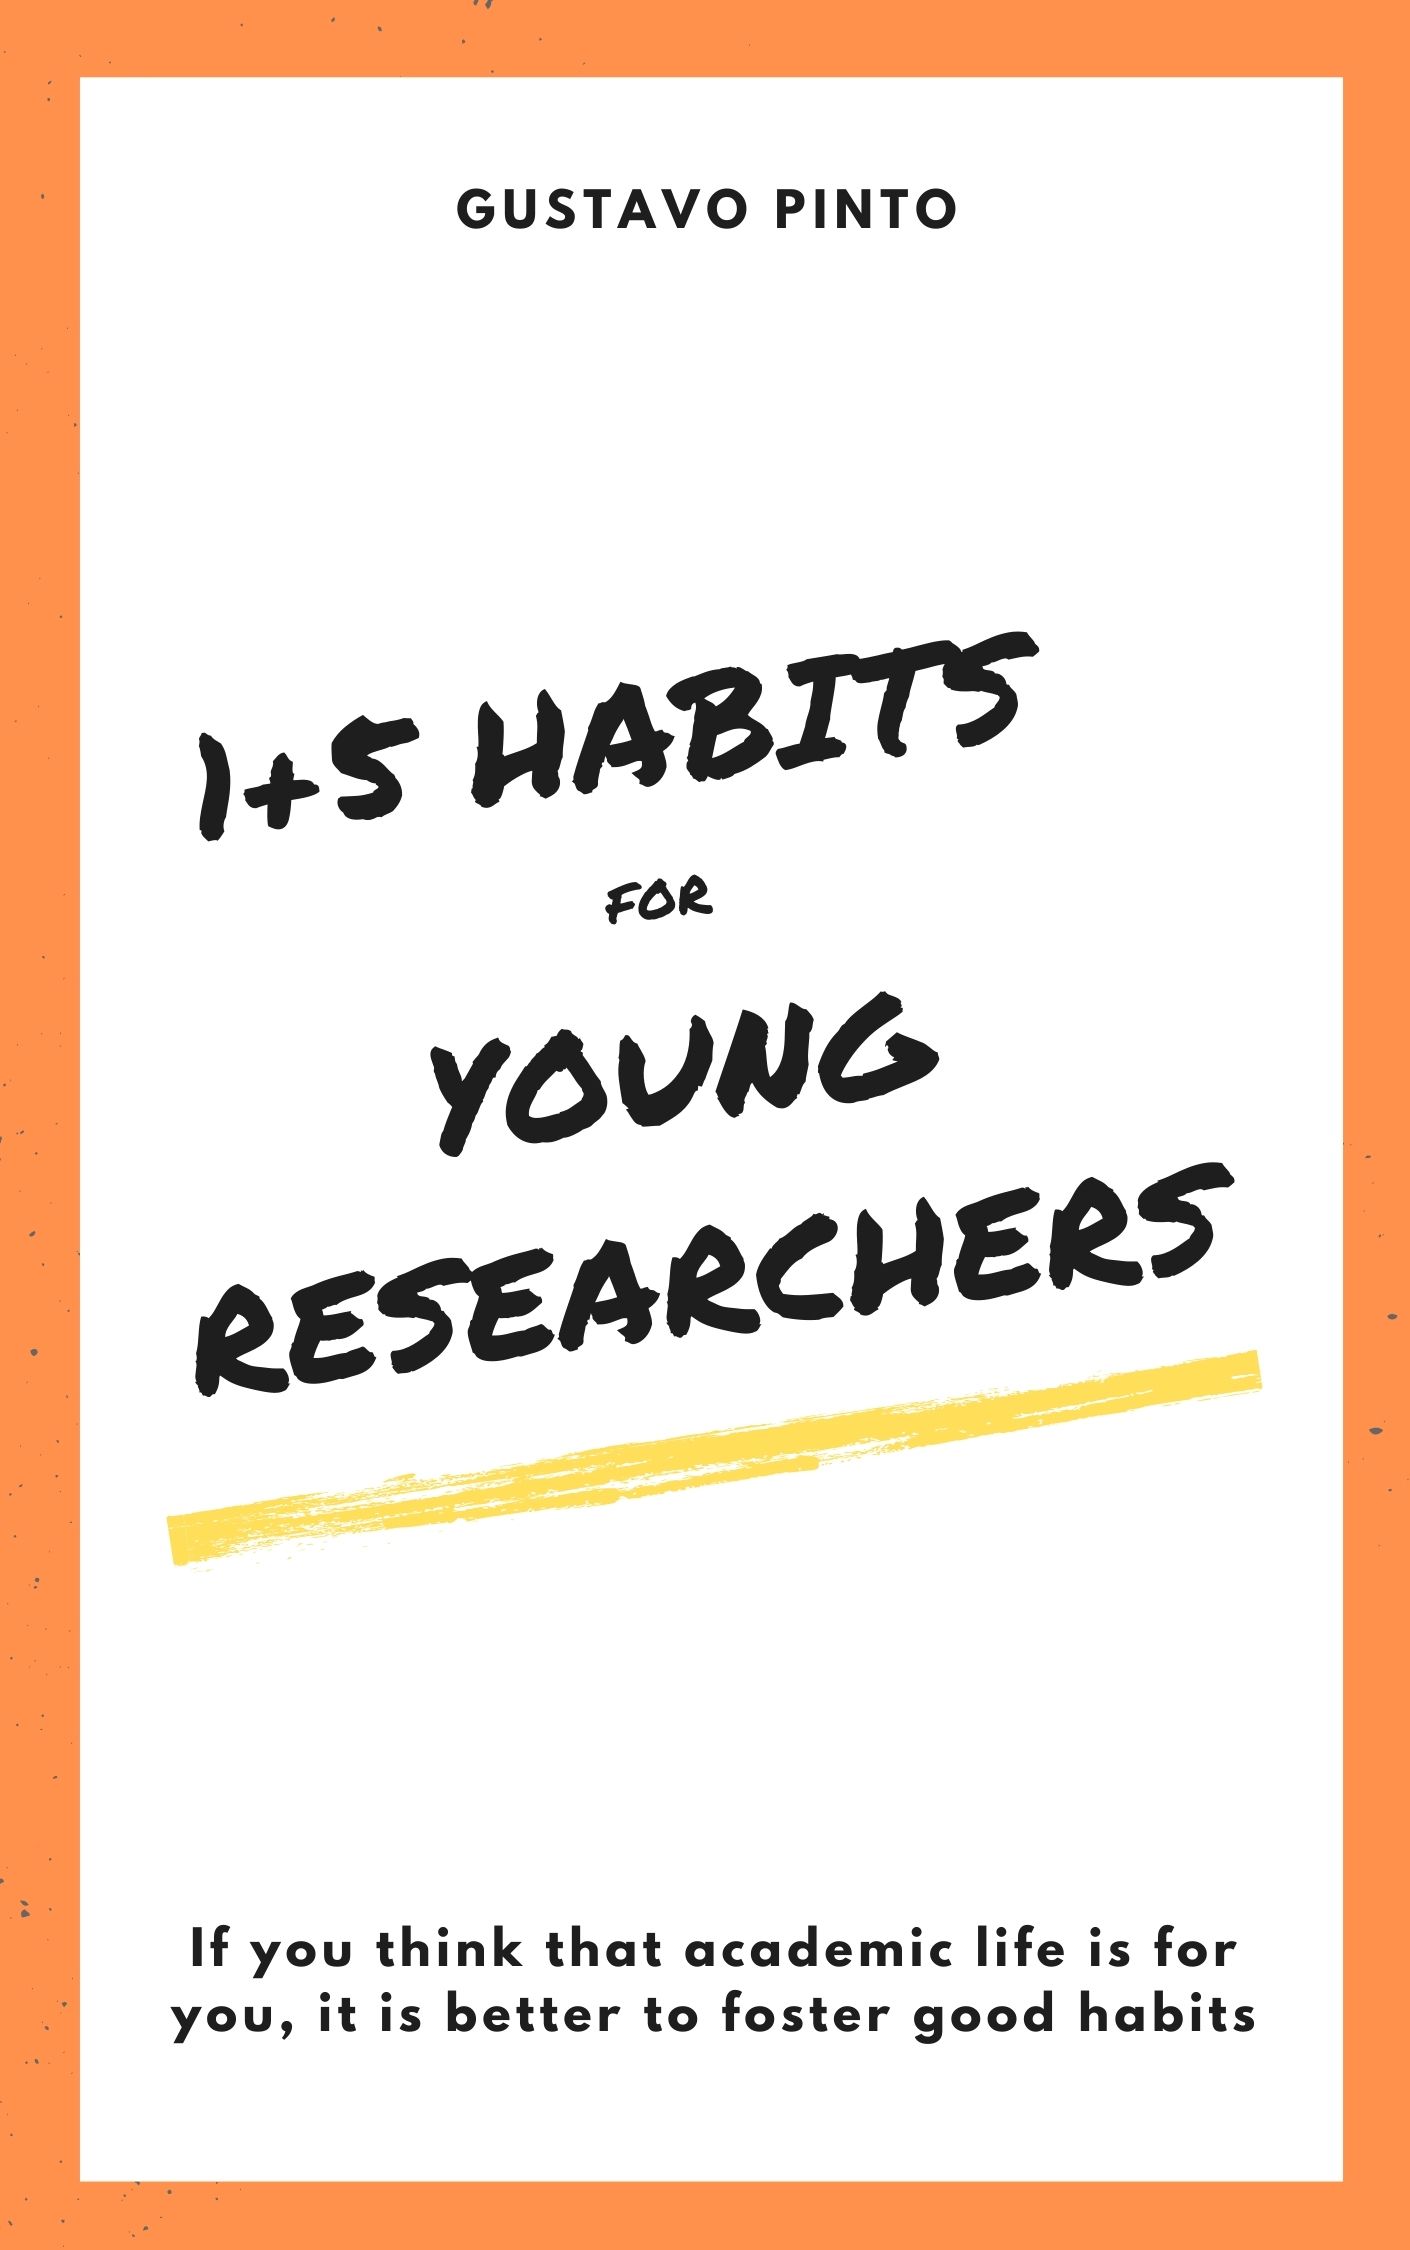 1+5 Habits for Young Researchers